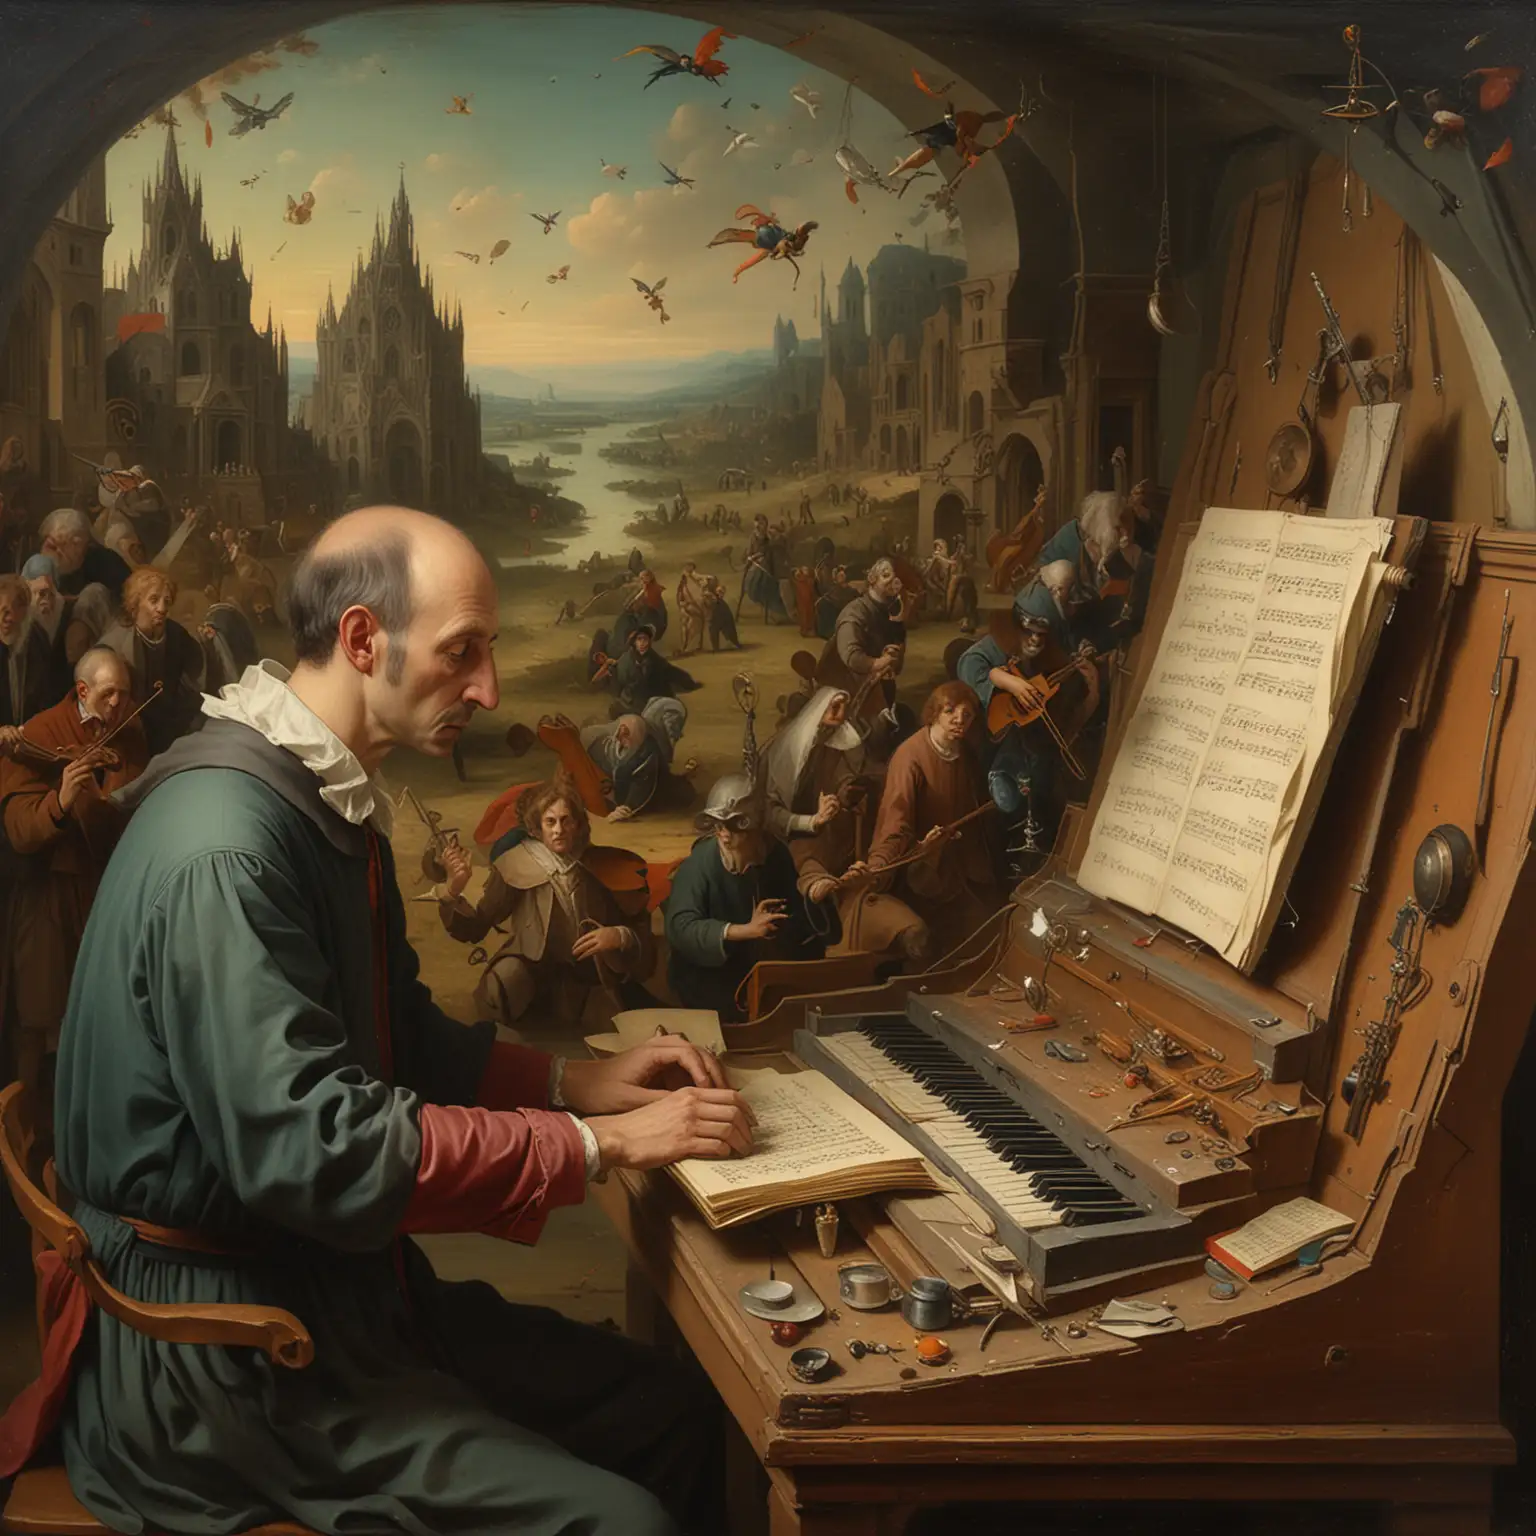 composer creating noise doom day hymn, antique painting in Bosch style
